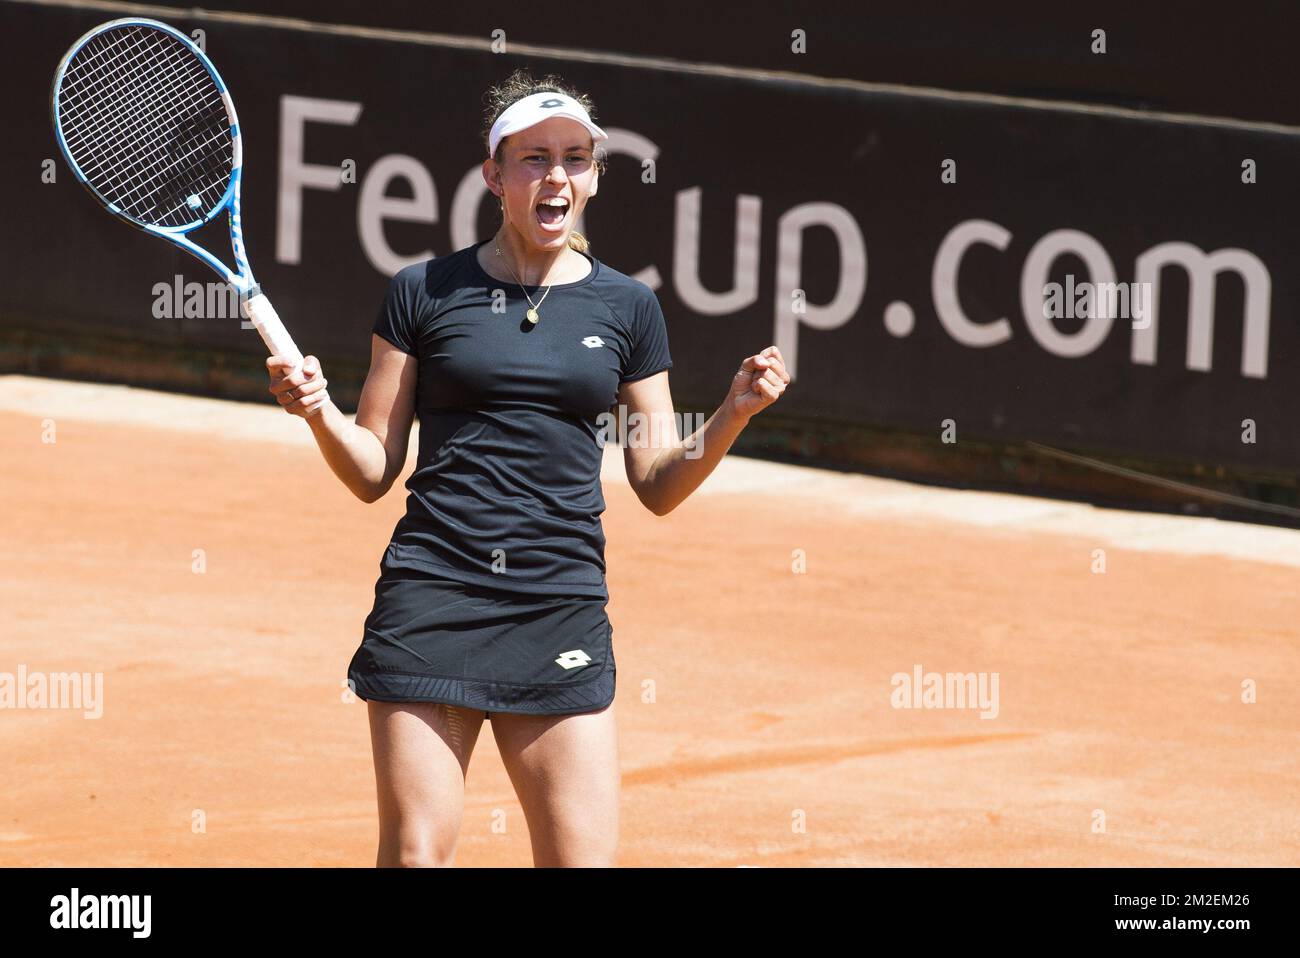 Belgian Elise Mertens celebrates after winning a tennis game between  Italian Sara Errani and Belgian Elise Mertens (WTA 17), the third rubber of  this weekend's Fed Cup World Group Play Off meeting